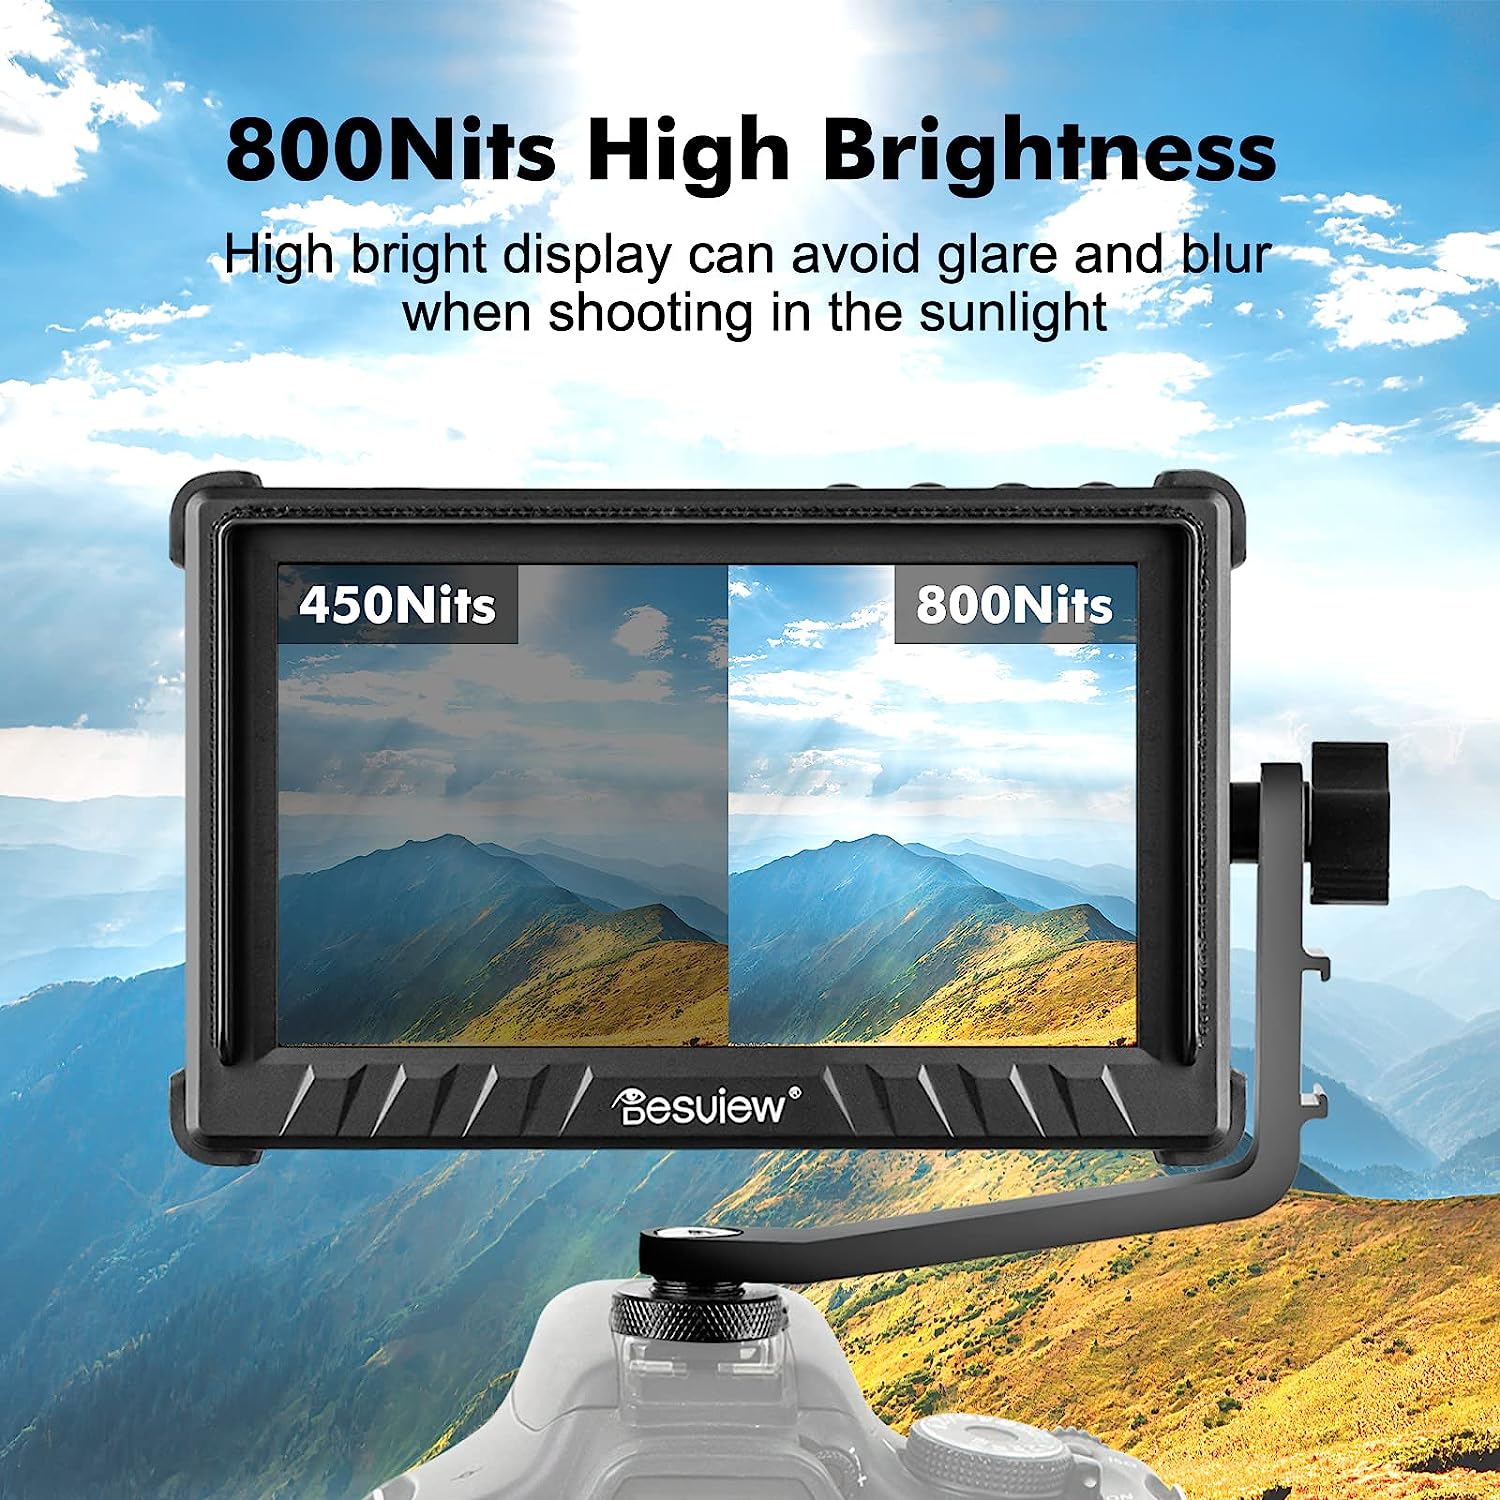 Desview P5II Camera Field Monitor Touch Screen, 5.5 inch 800nits High Brightness 4K HDMI Field Monitor with HDR 3D LUT RGB Waveform Vectorscope False Color for DSLR Camera (Anti-Dropping)